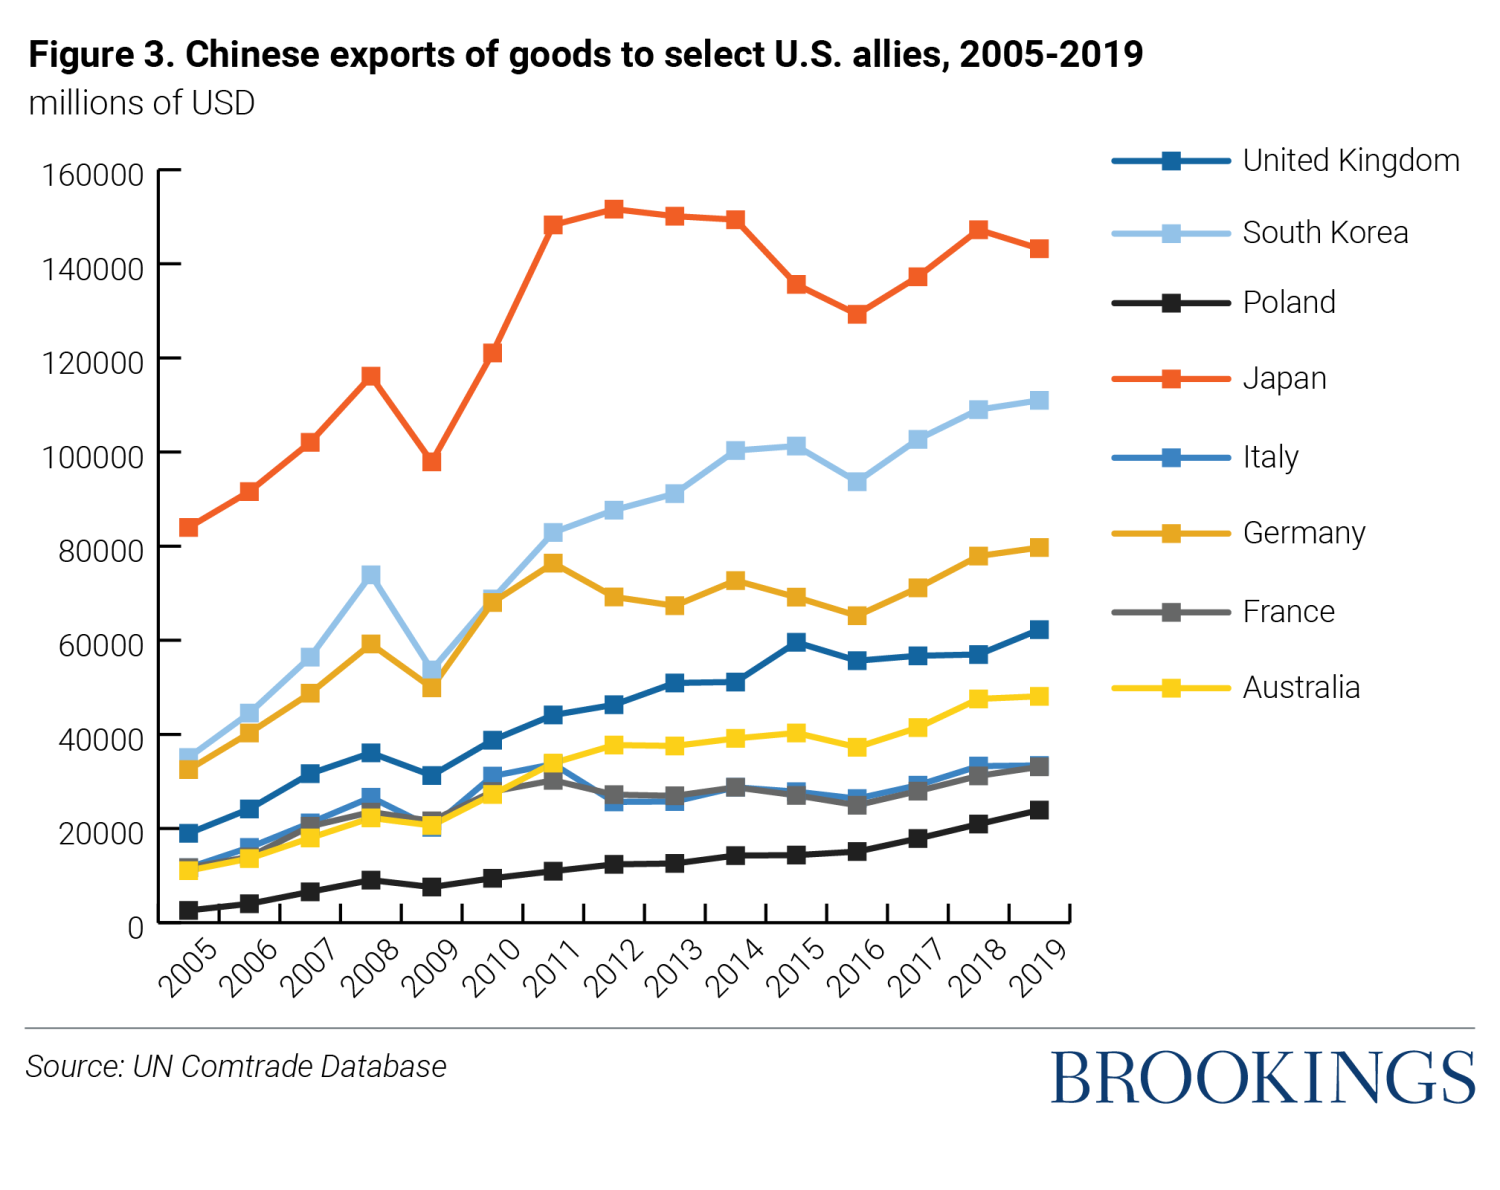 Figure 3: Chinese exports of goods (millions of USD) to select U.S. allies, 2005-2019